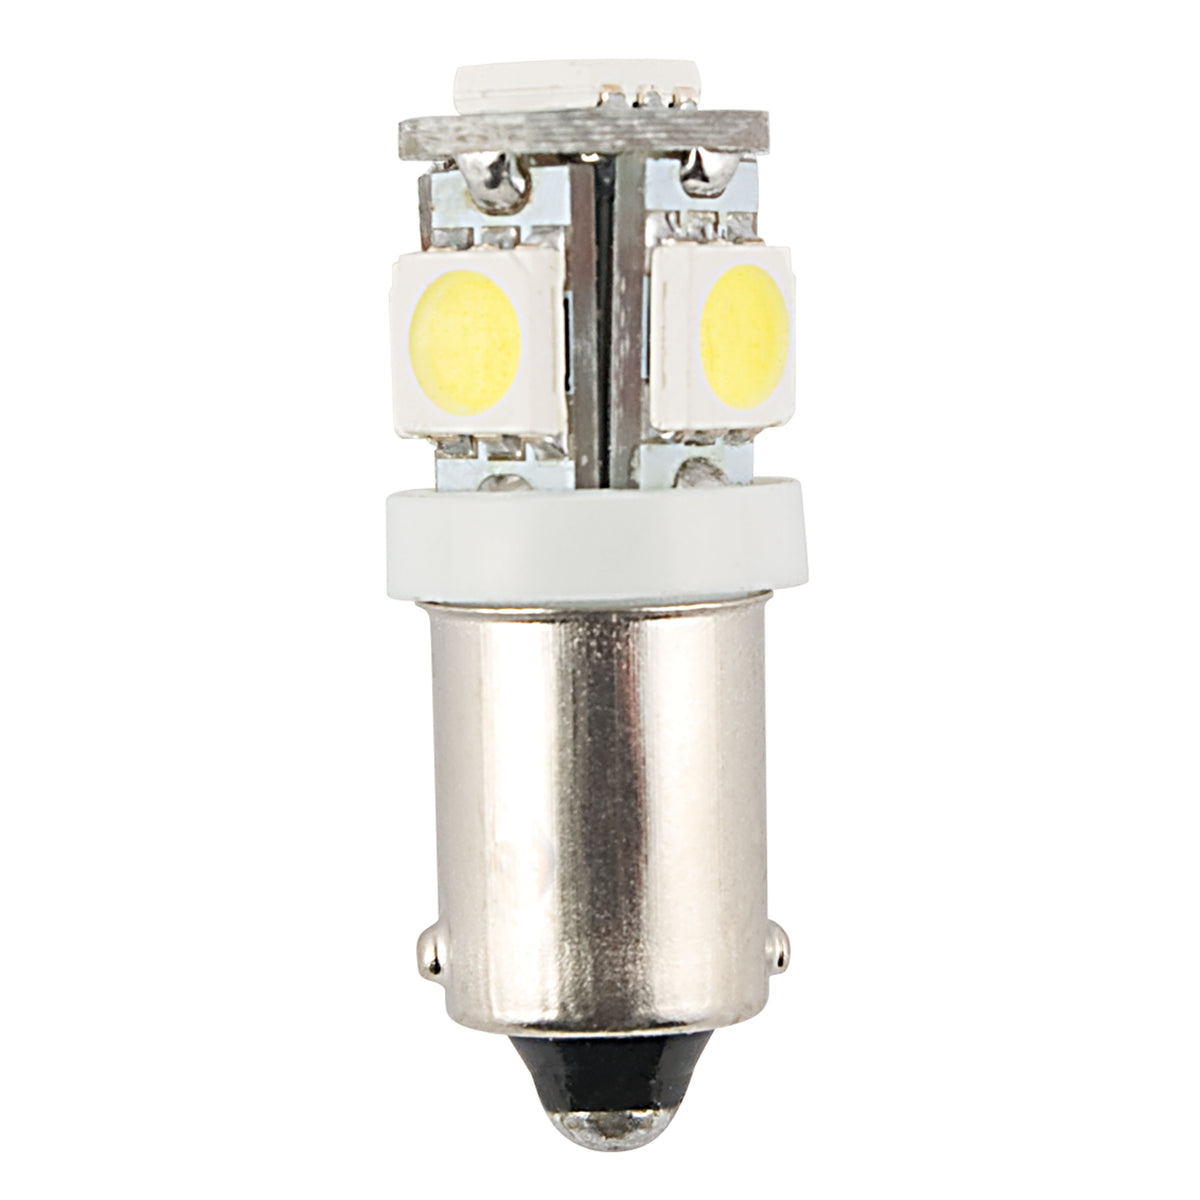 AP Products 016-57-75 Replacement LED Light Bulb